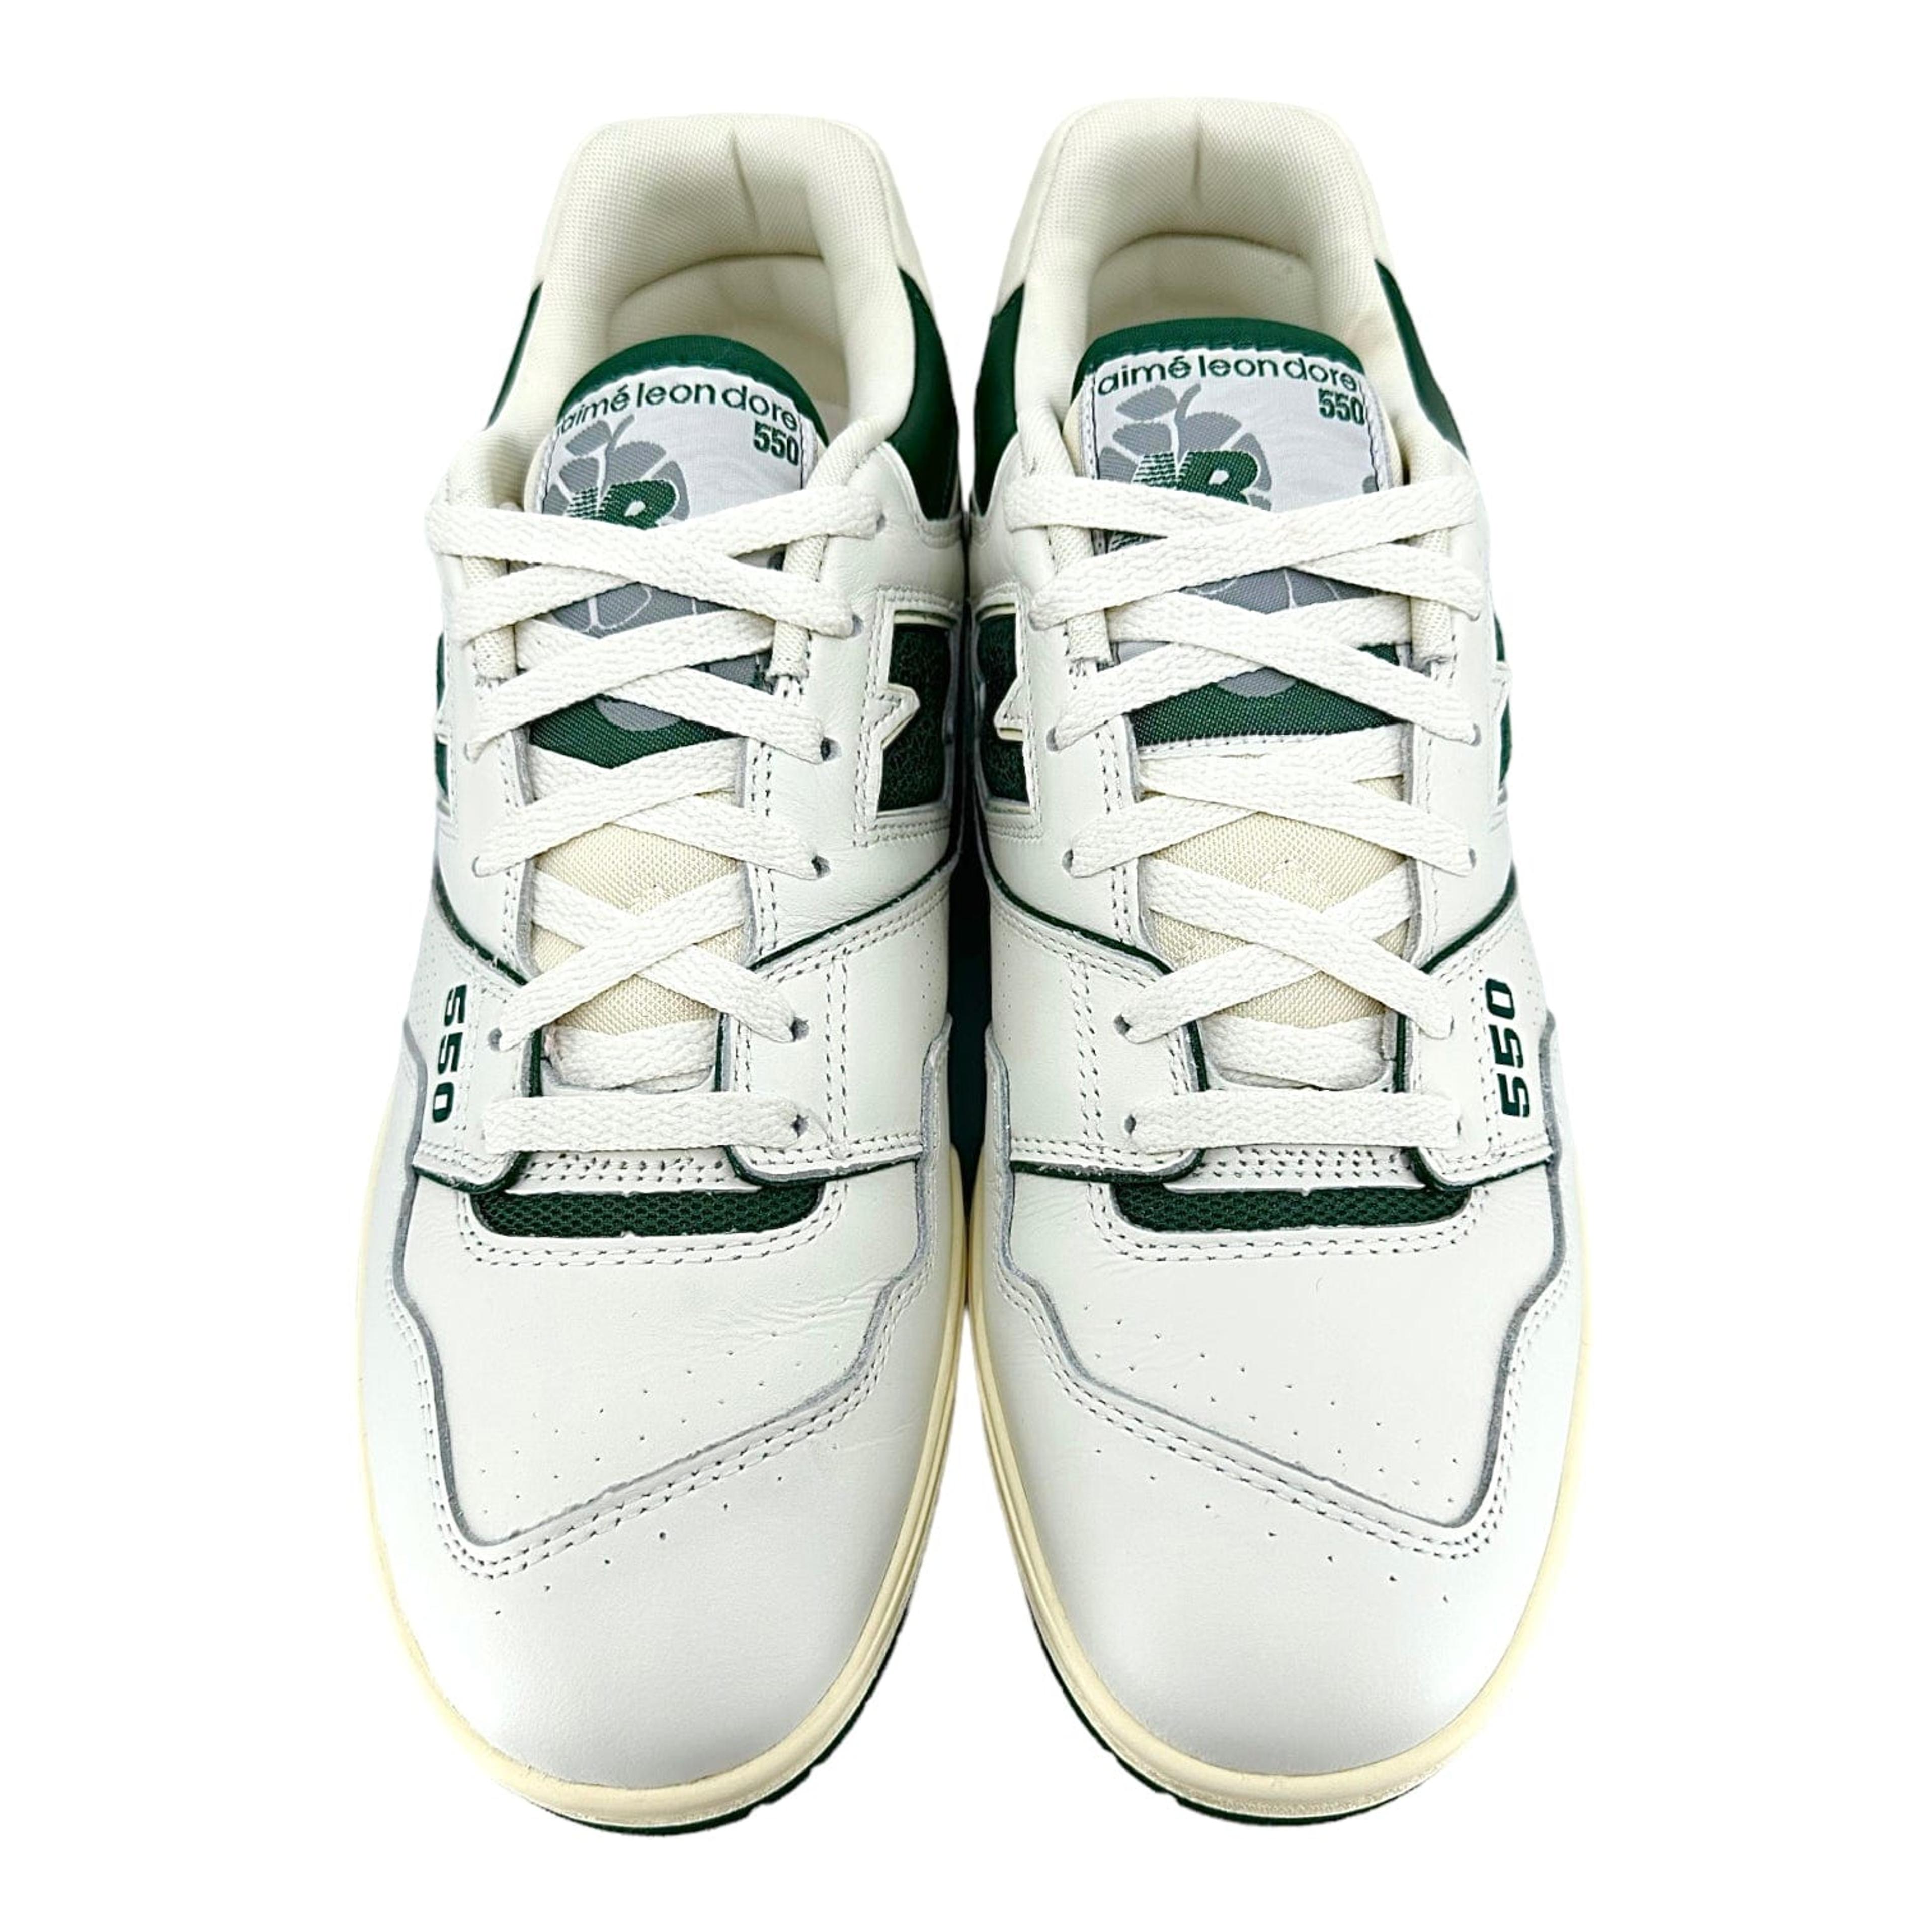 Alternate View 4 of New Balance 550 Aime Leon Dore White Green Pre-Owned